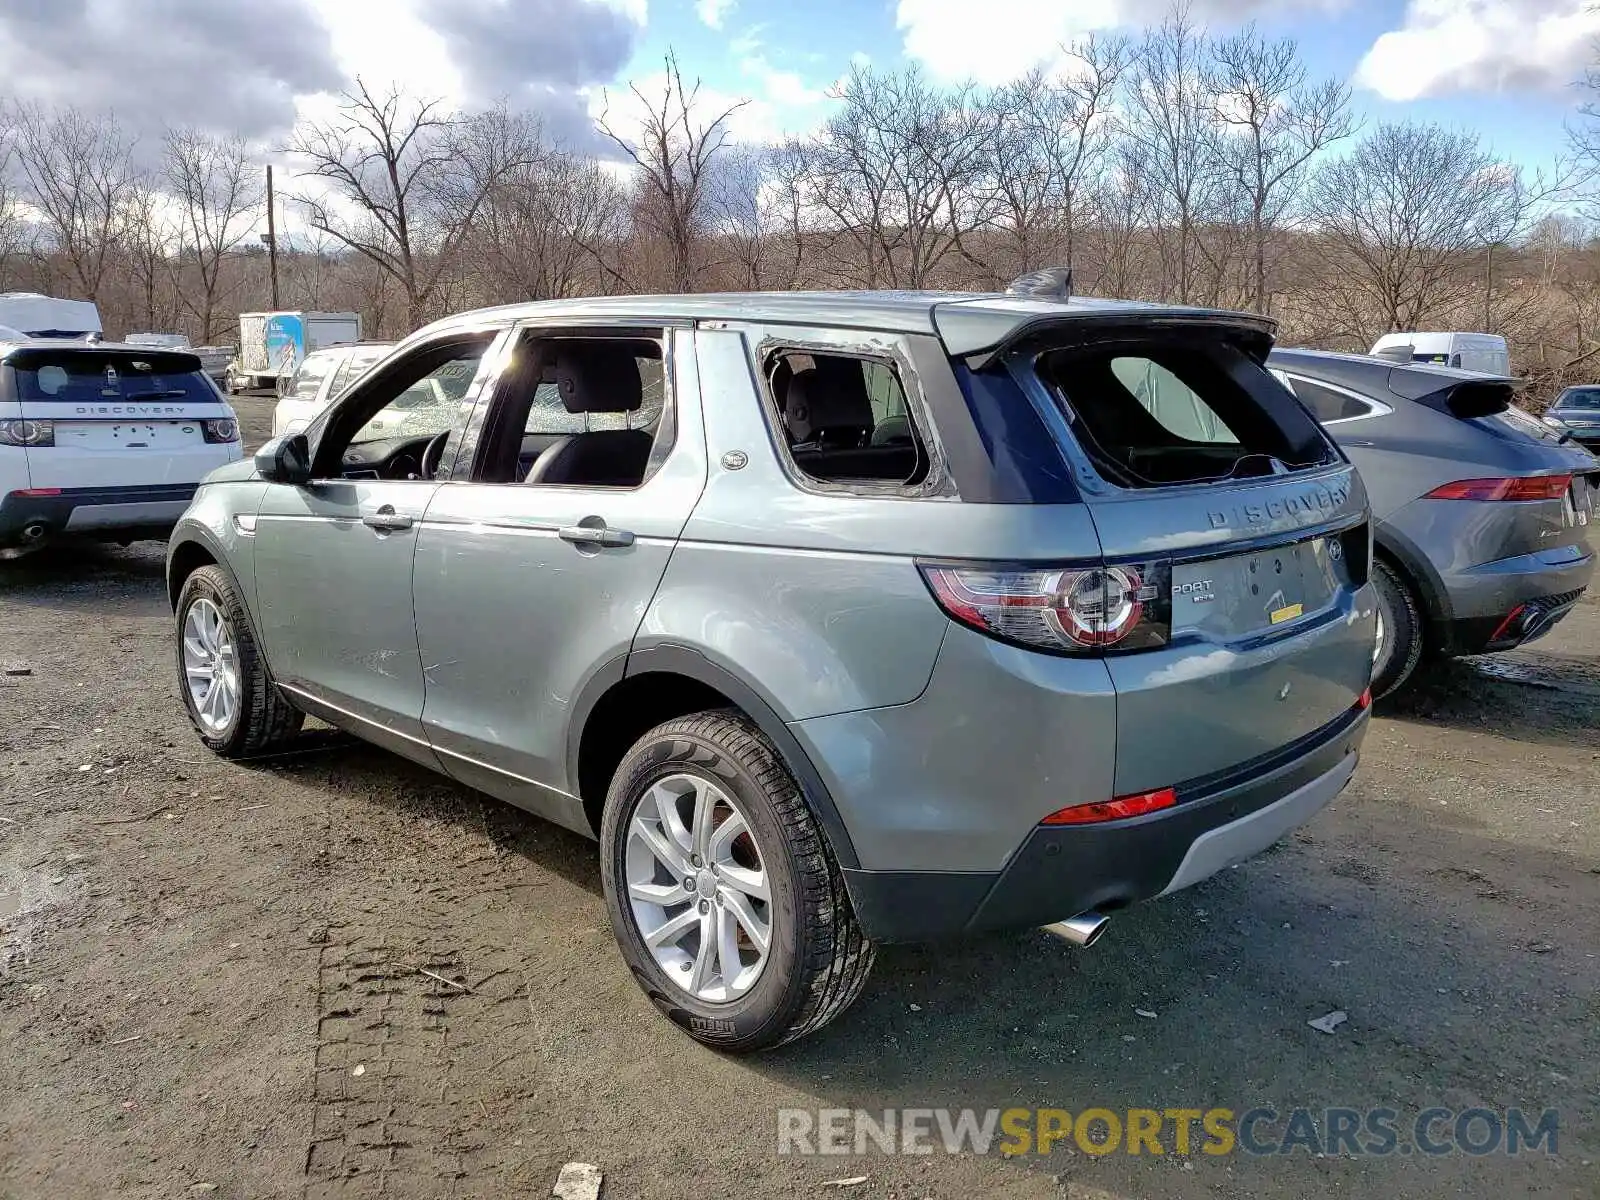 3 Photograph of a damaged car SALCR2FXXKH813894 LAND ROVER DISCOVERY 2019